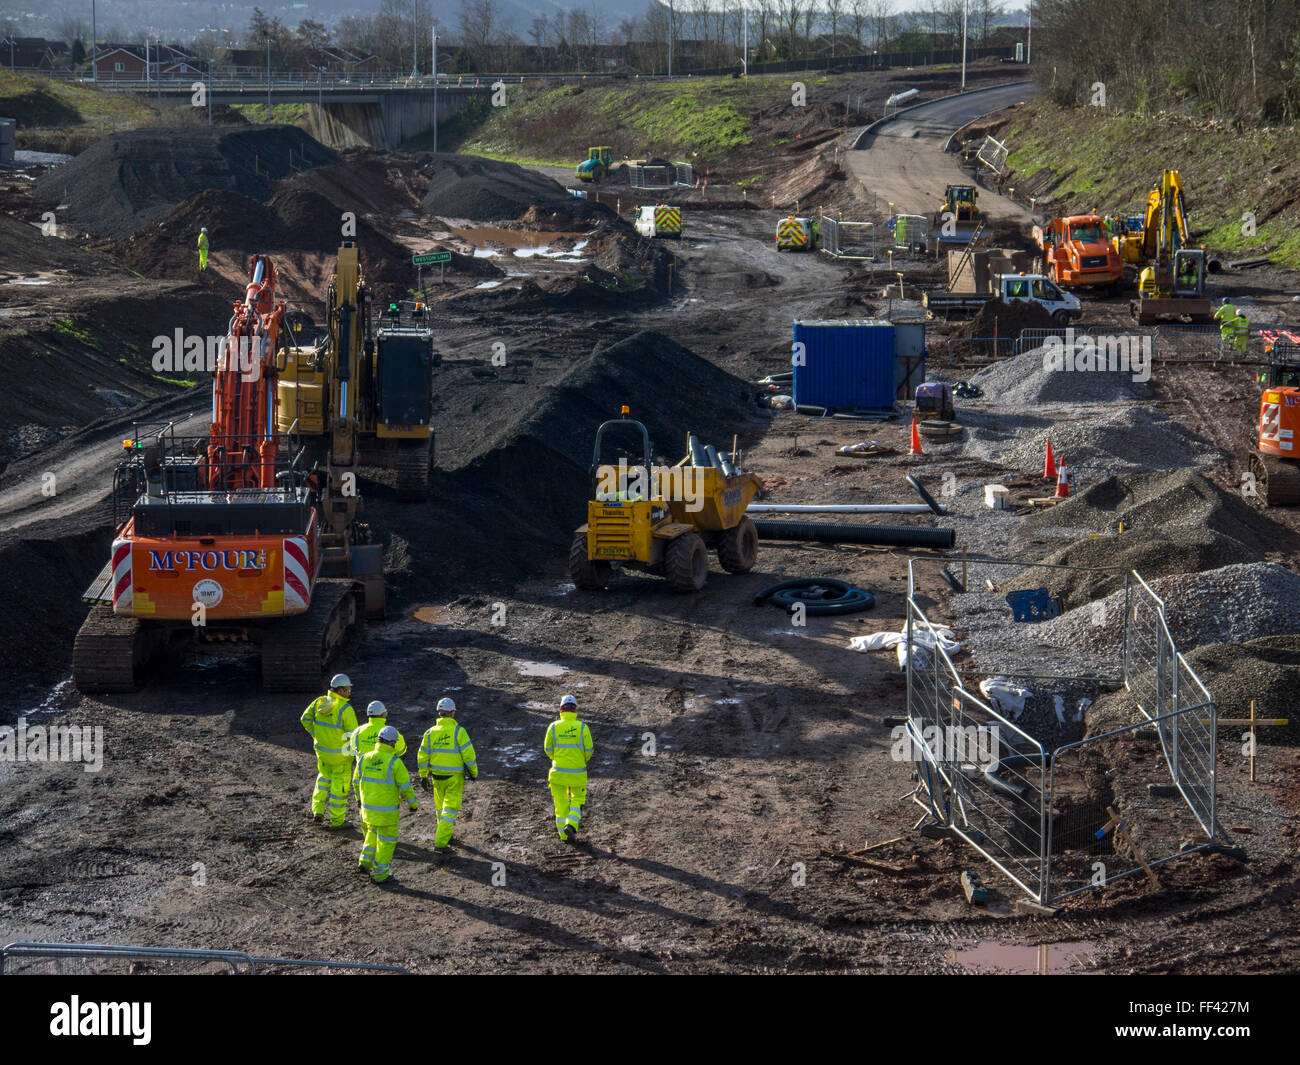 New road construction site, showing men working in safety gear, diggers and dump trucks. Stock Photo